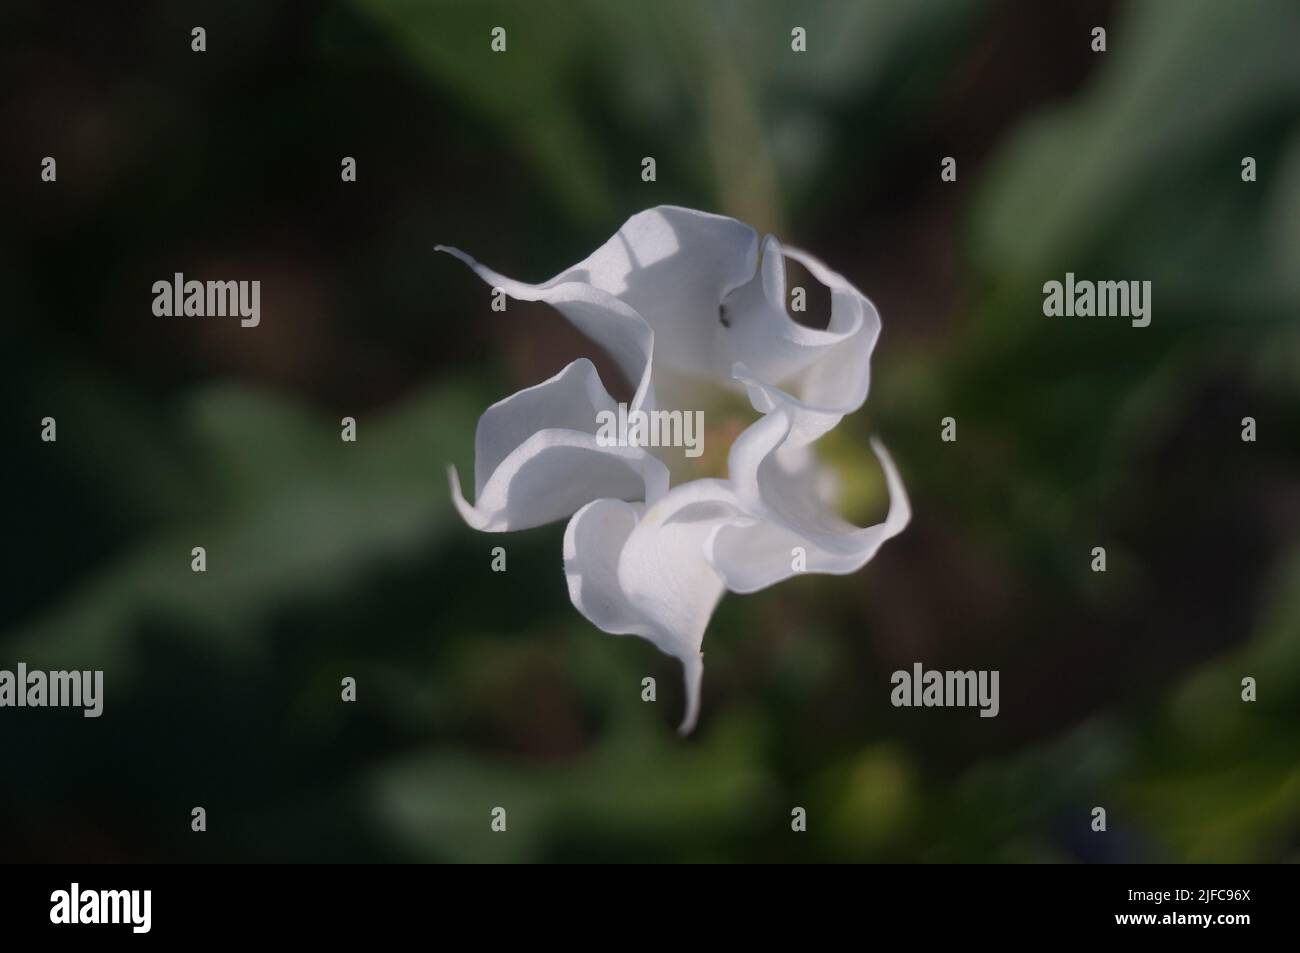 A closeup top view of Datura Stramonium on a blurred background Stock Photo